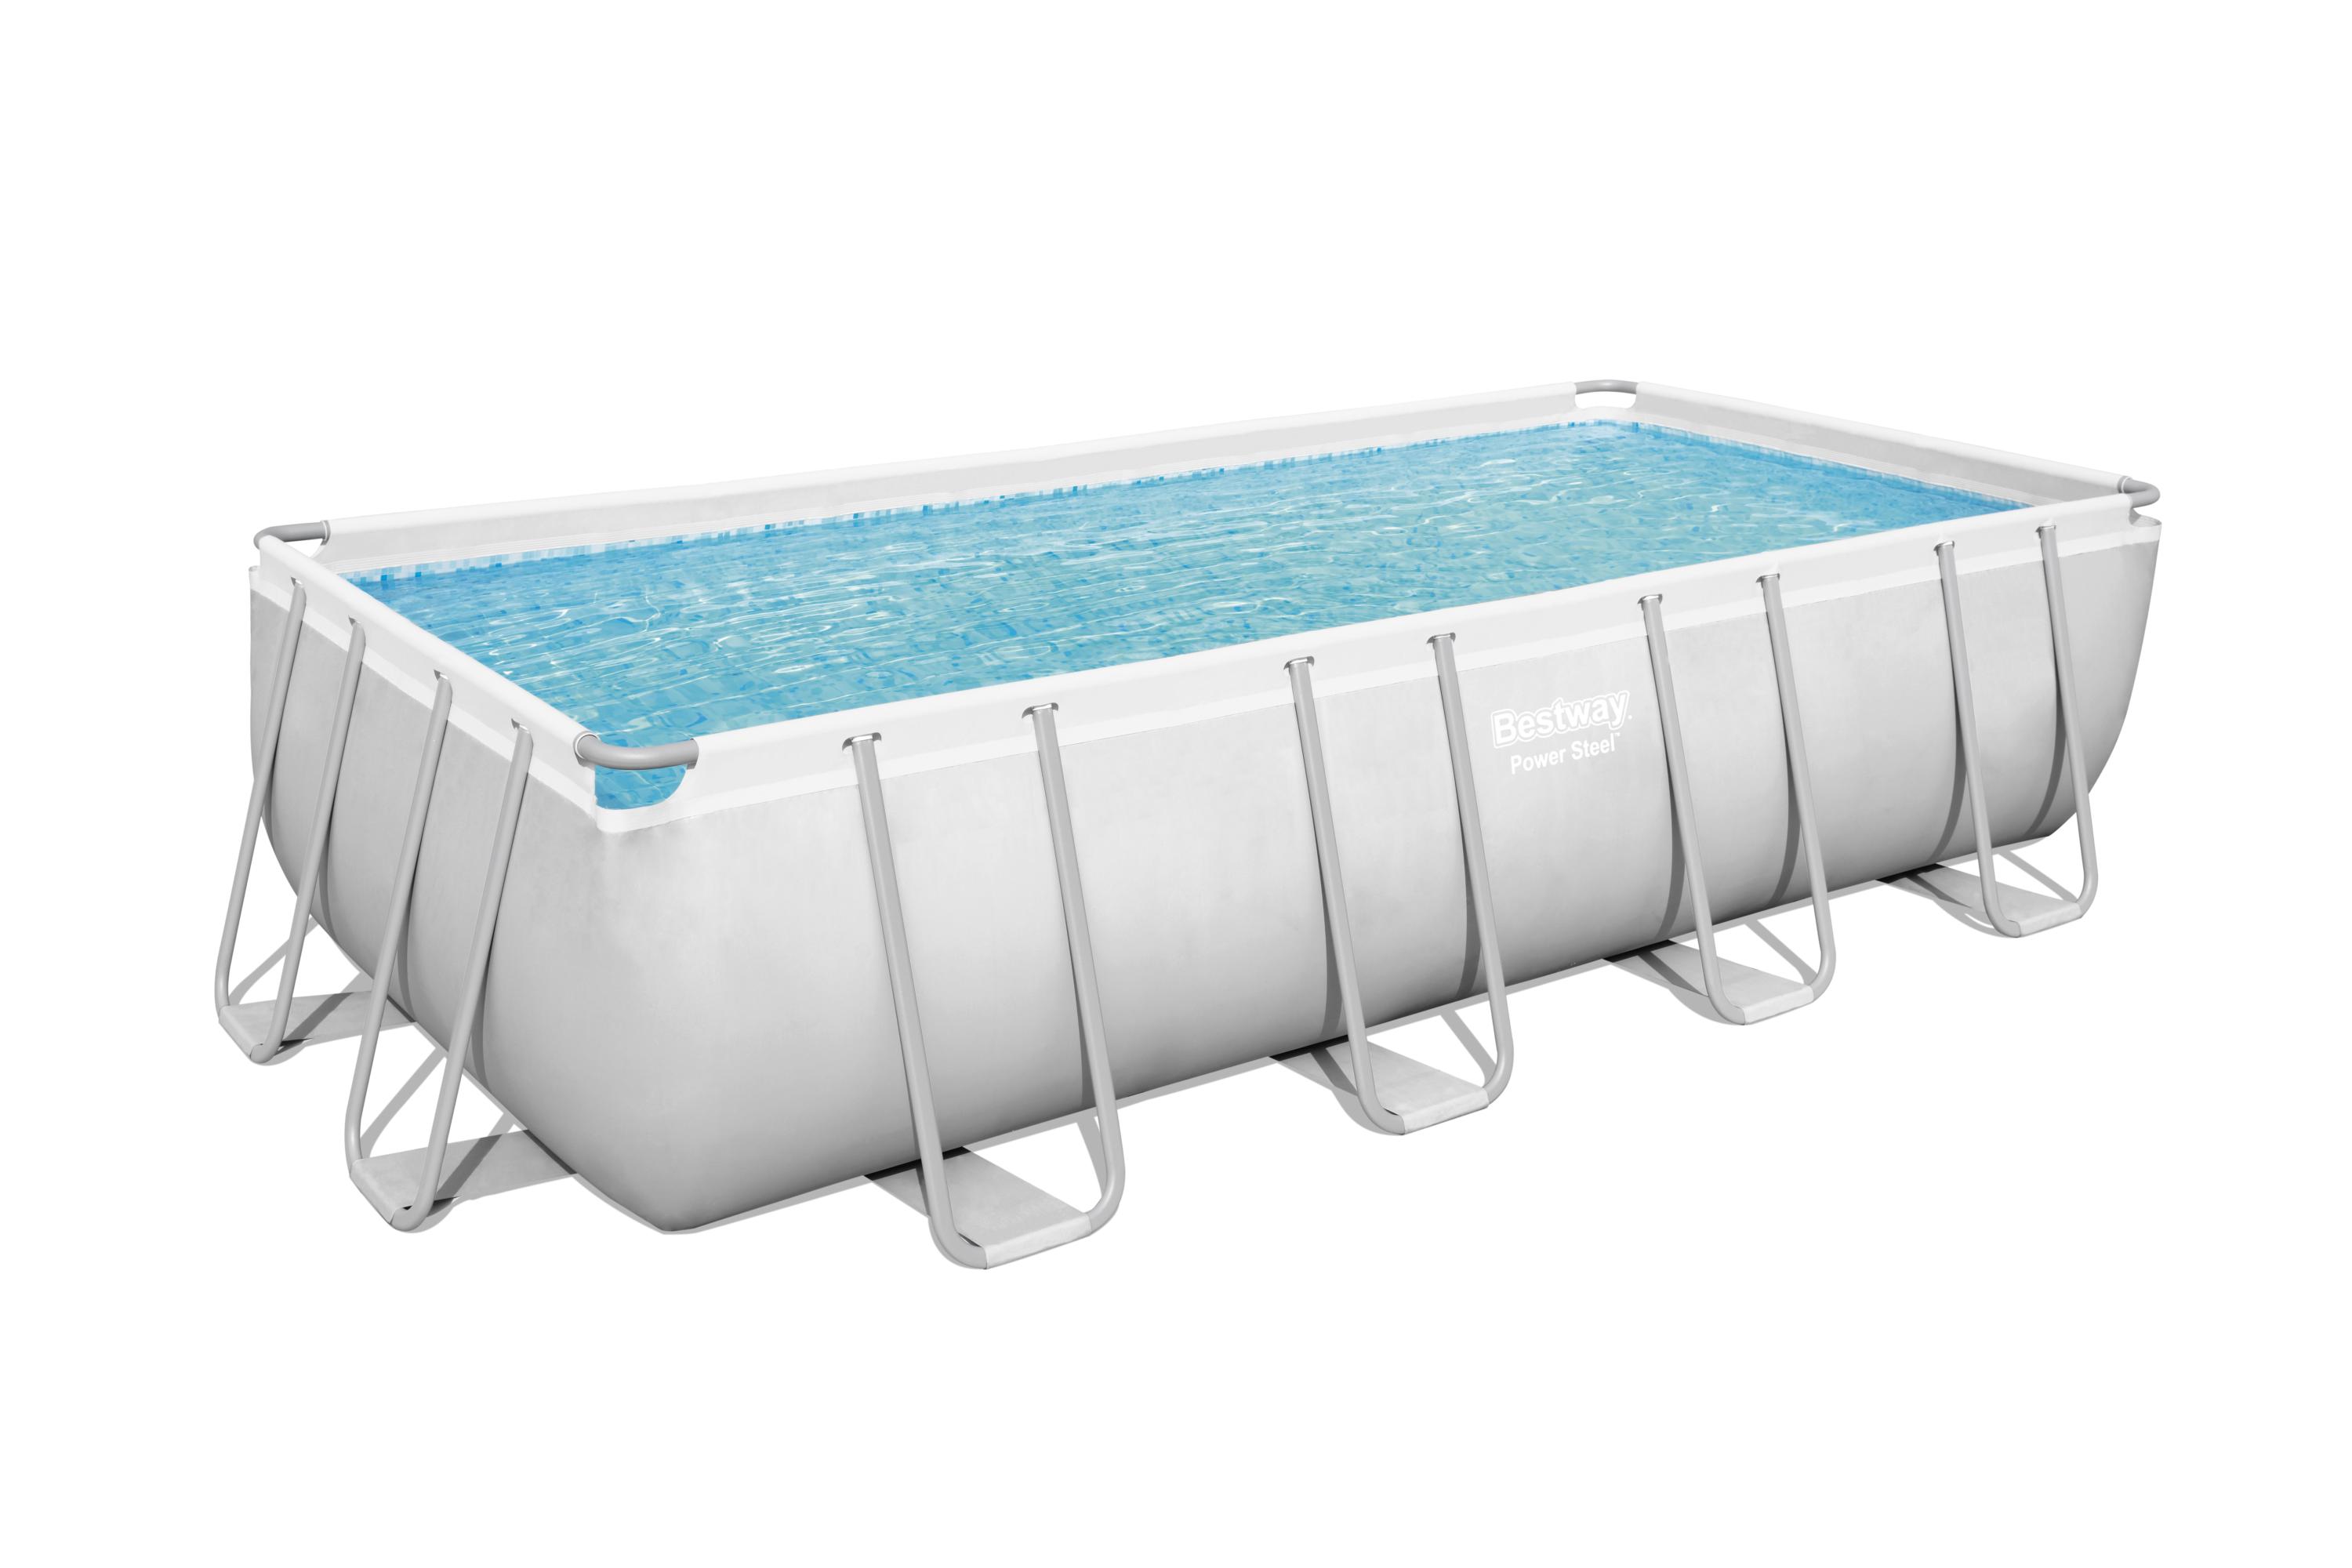 Bestway Power Steel 18' x 9' x 48" Rectangular Metal Frame Swimming Pool Set with Pump, Ladder and Cover - image 1 of 8